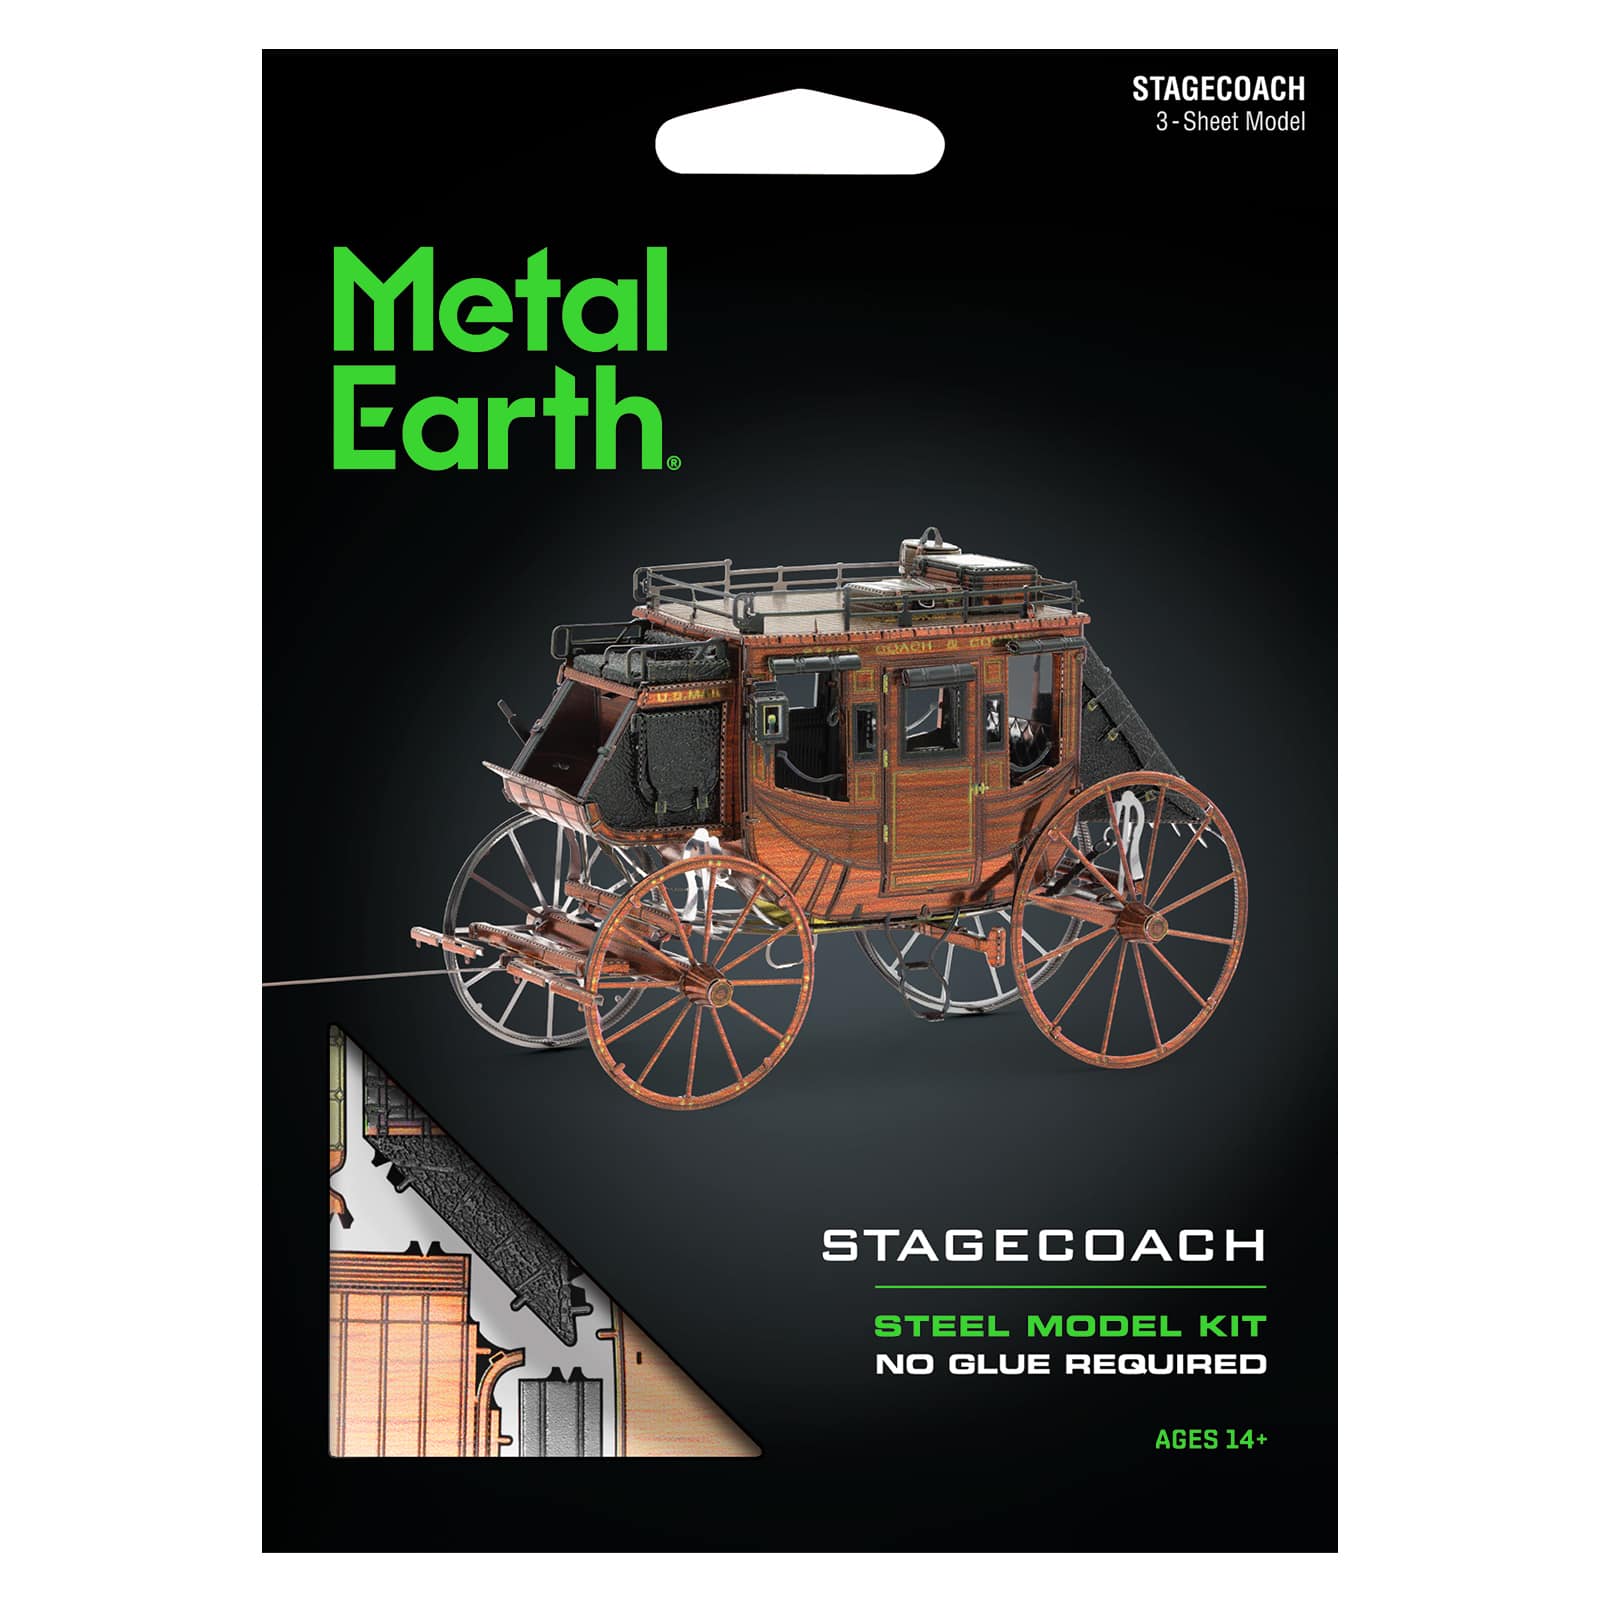 Metal Earth 3-piece Tool Kit from Fascinations, Hobbies & Toys, Stationery  & Craft, Craft Supplies & Tools on Carousell